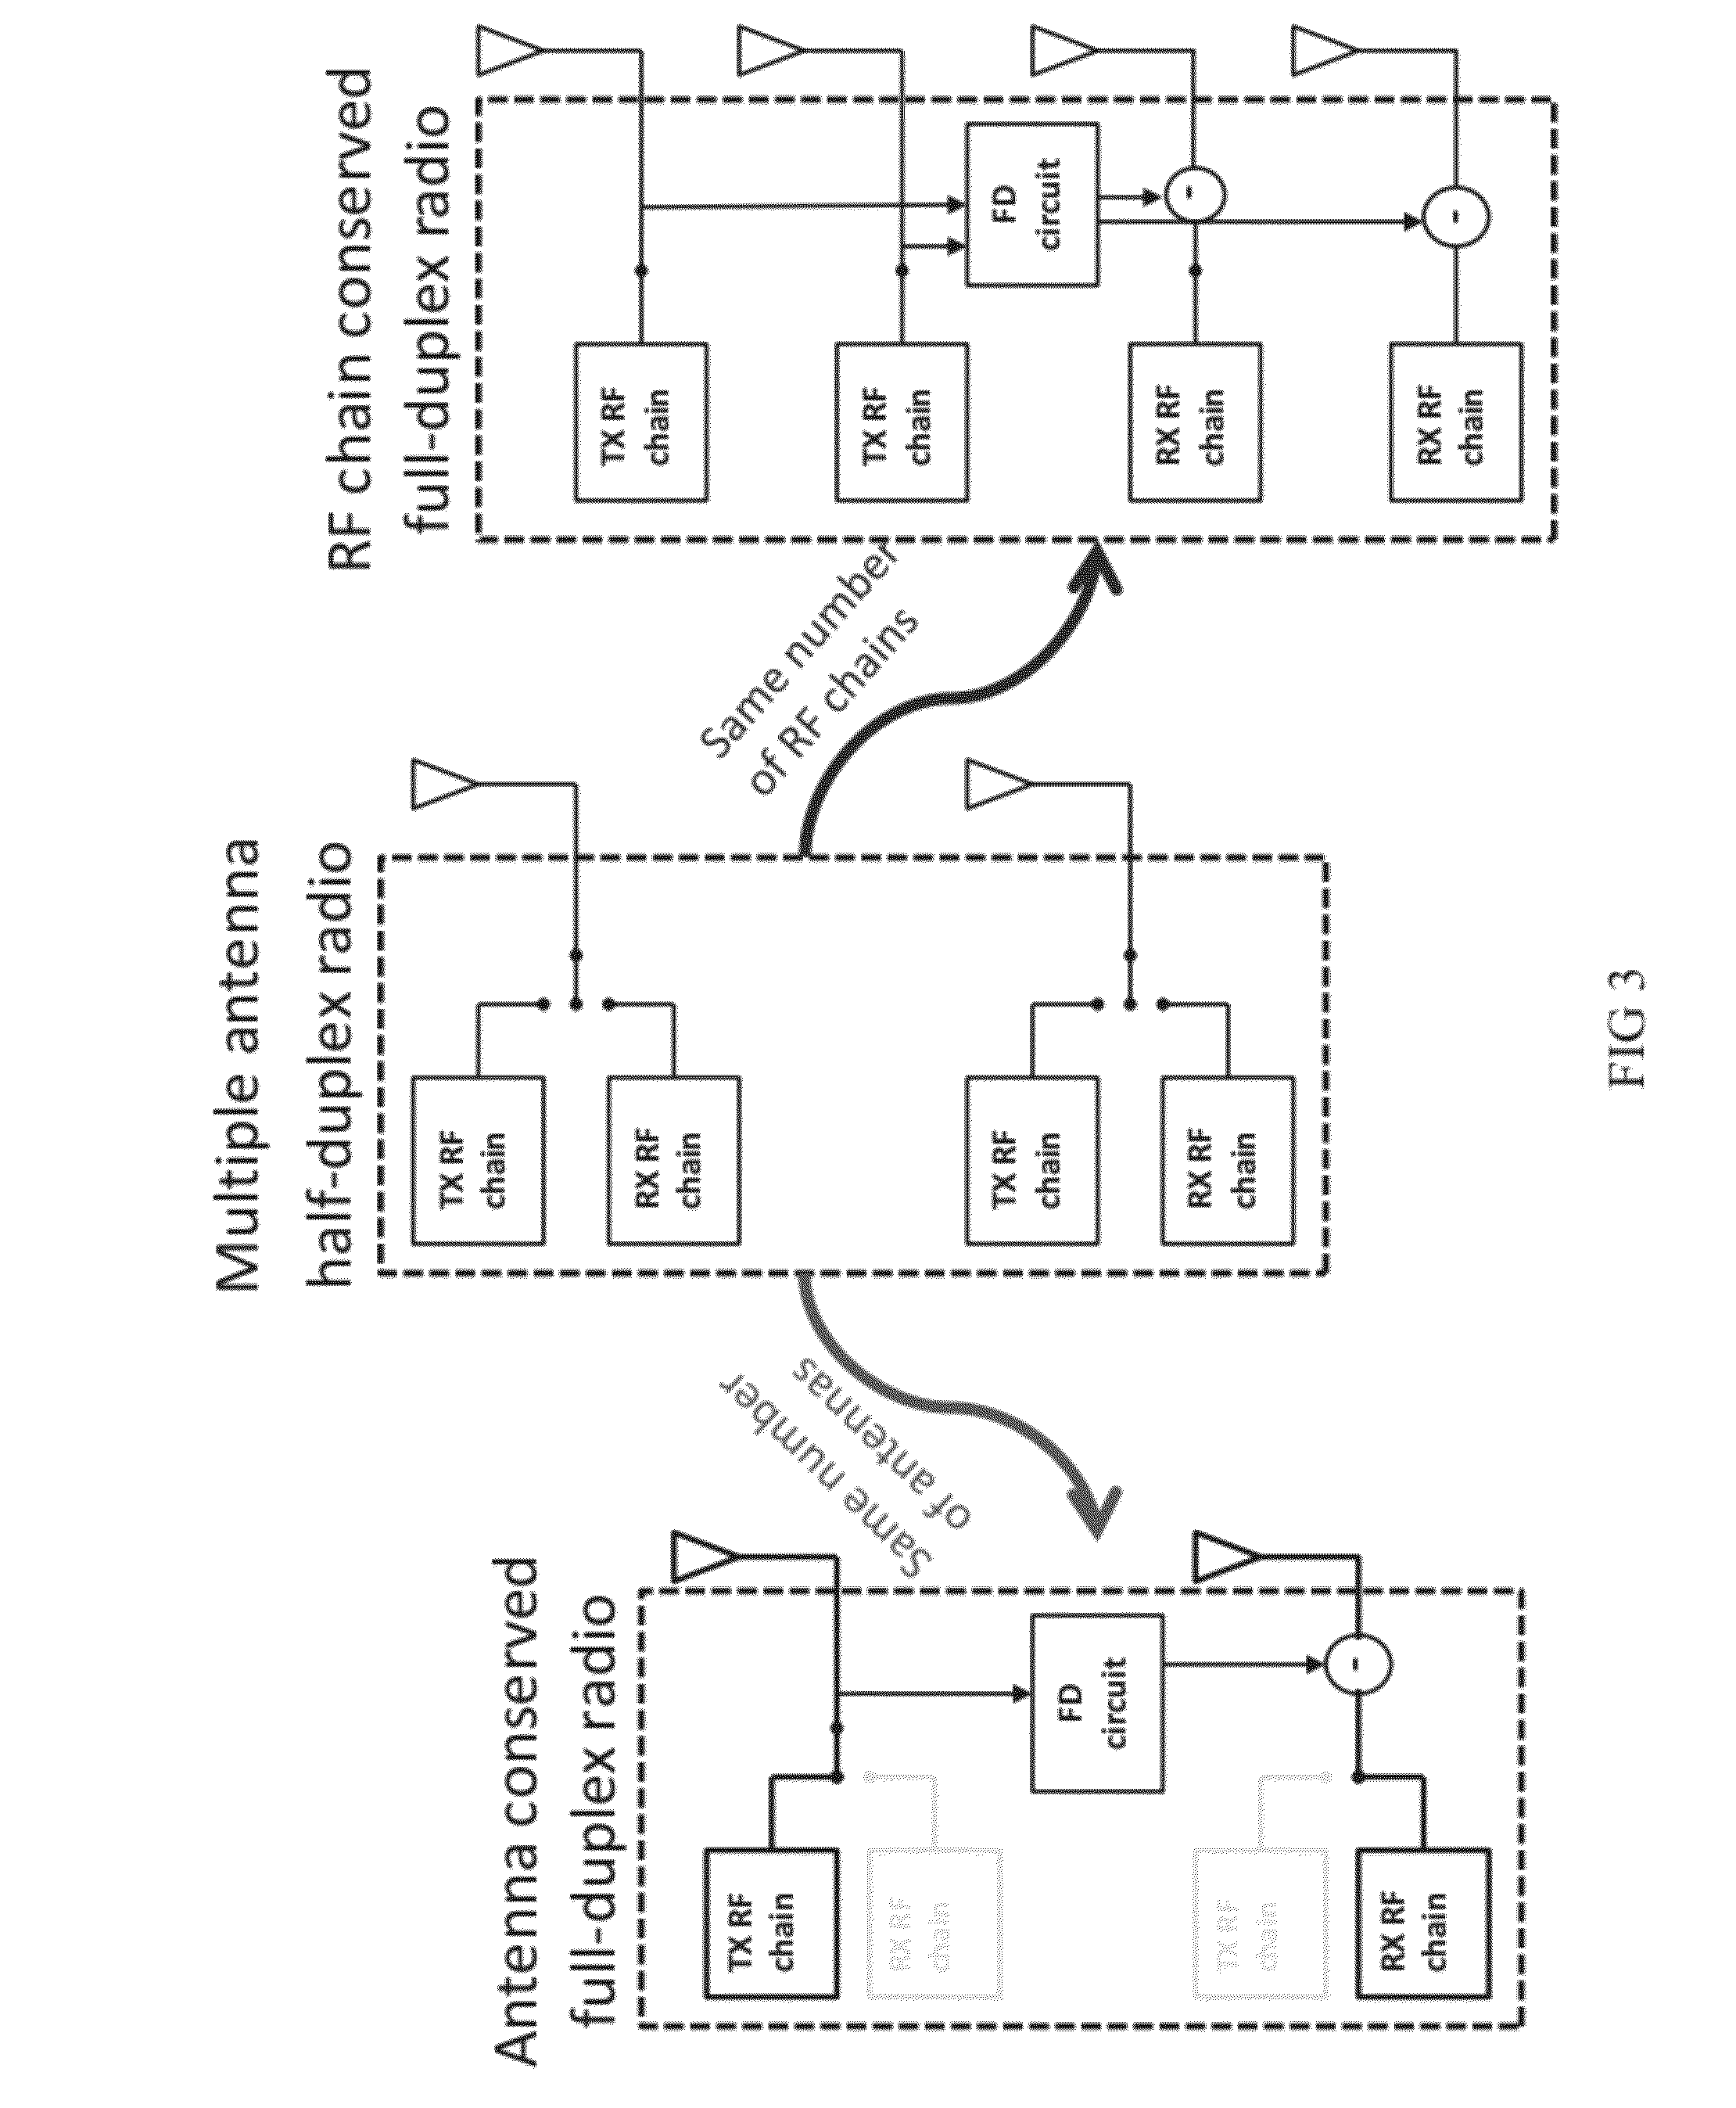 Method for a Canceling Self Interference Signal Using Active Noise Cancellation in the Air for Full Duplex Simultaneous (In Time) and Overlapping (In Space) Wireless Transmission & Reception on the Same Frequency band